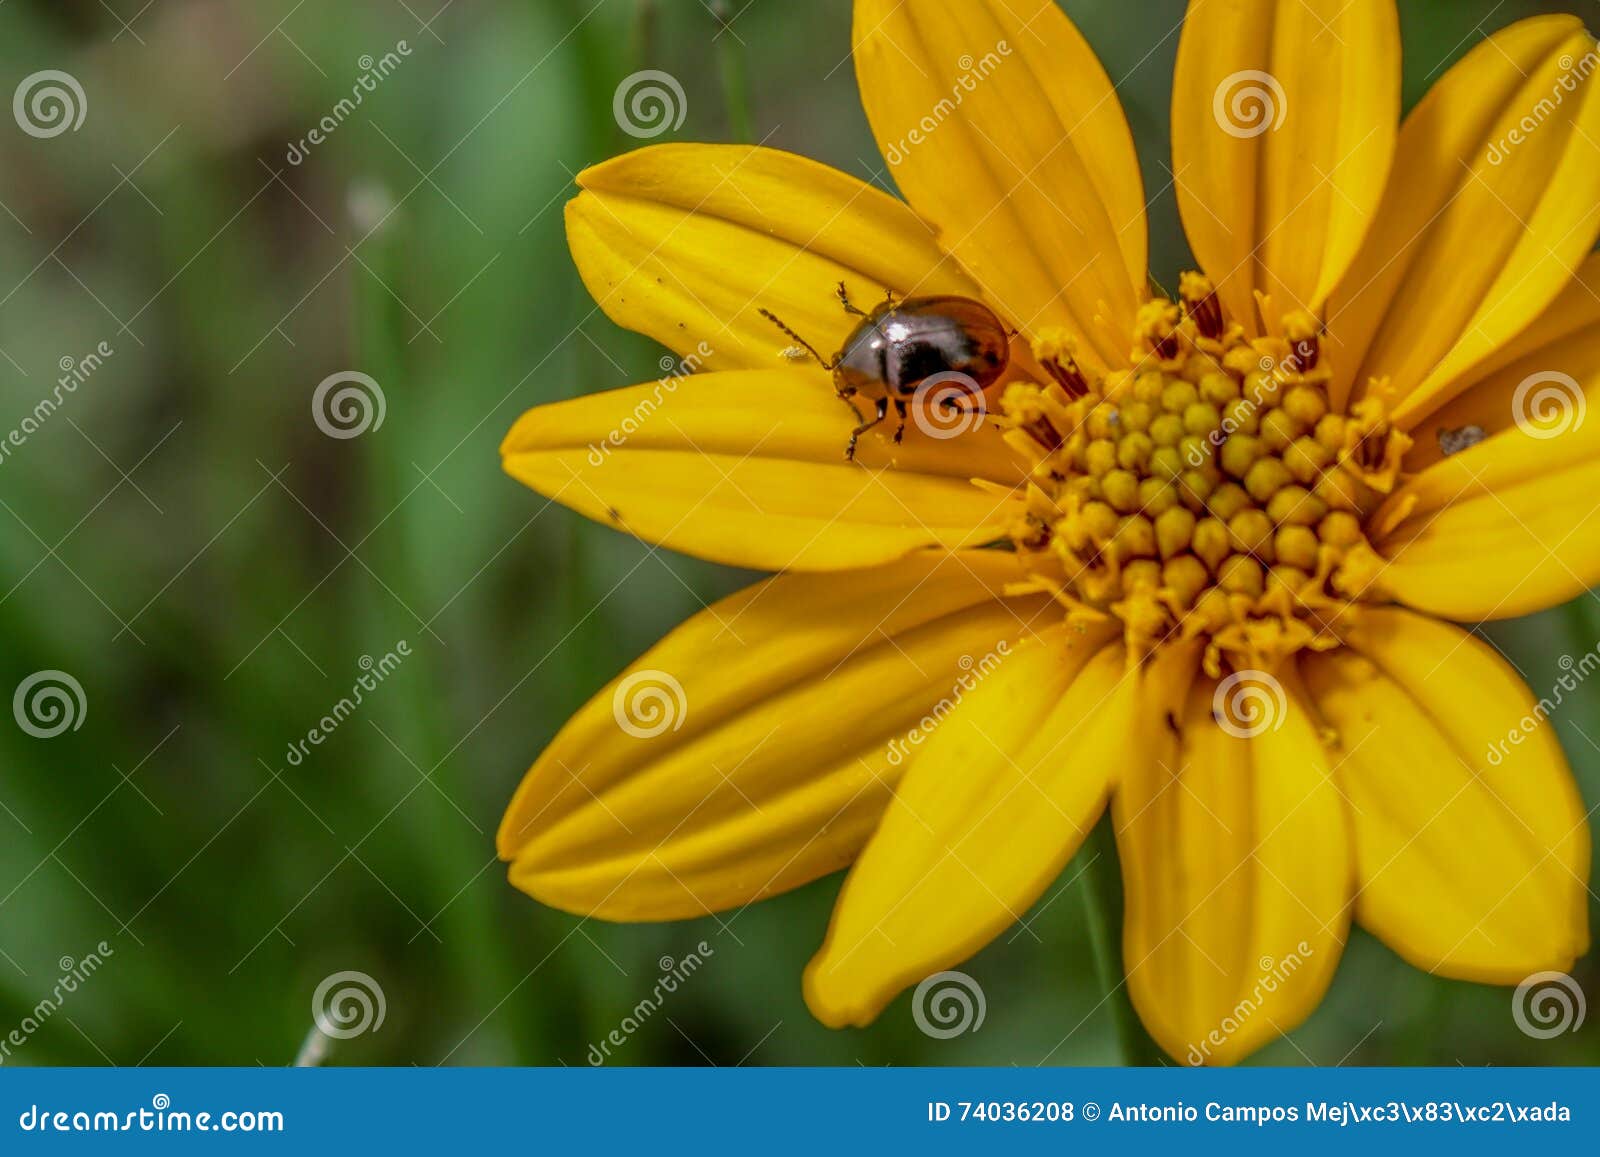 beetle in a yellow flower